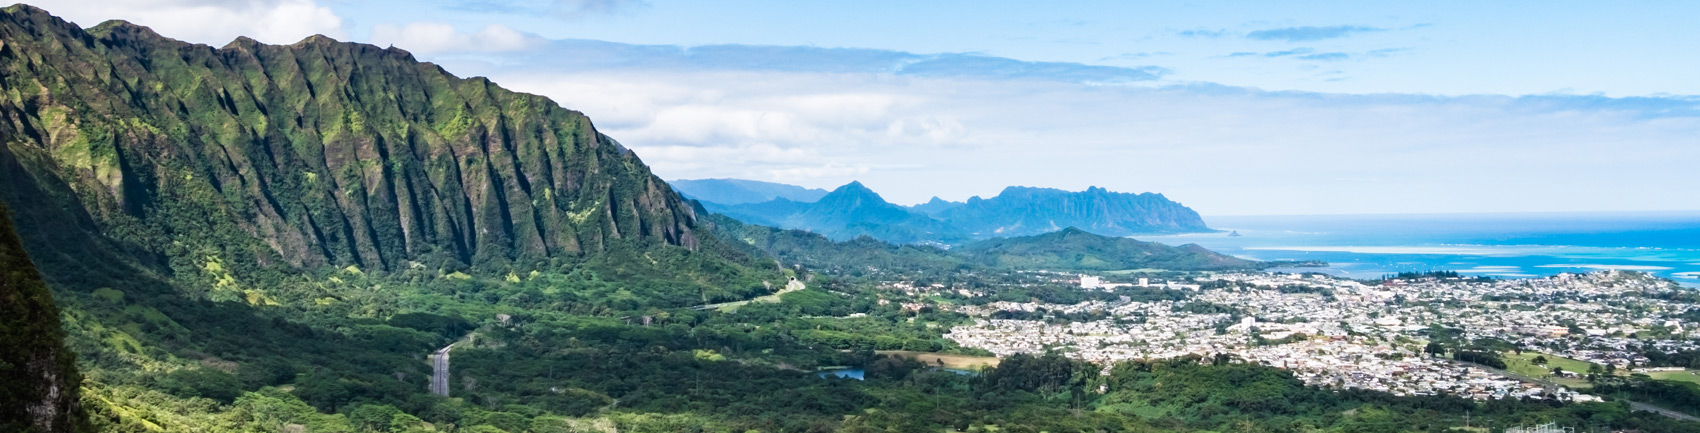 View from Nuuanu Pali Lookout